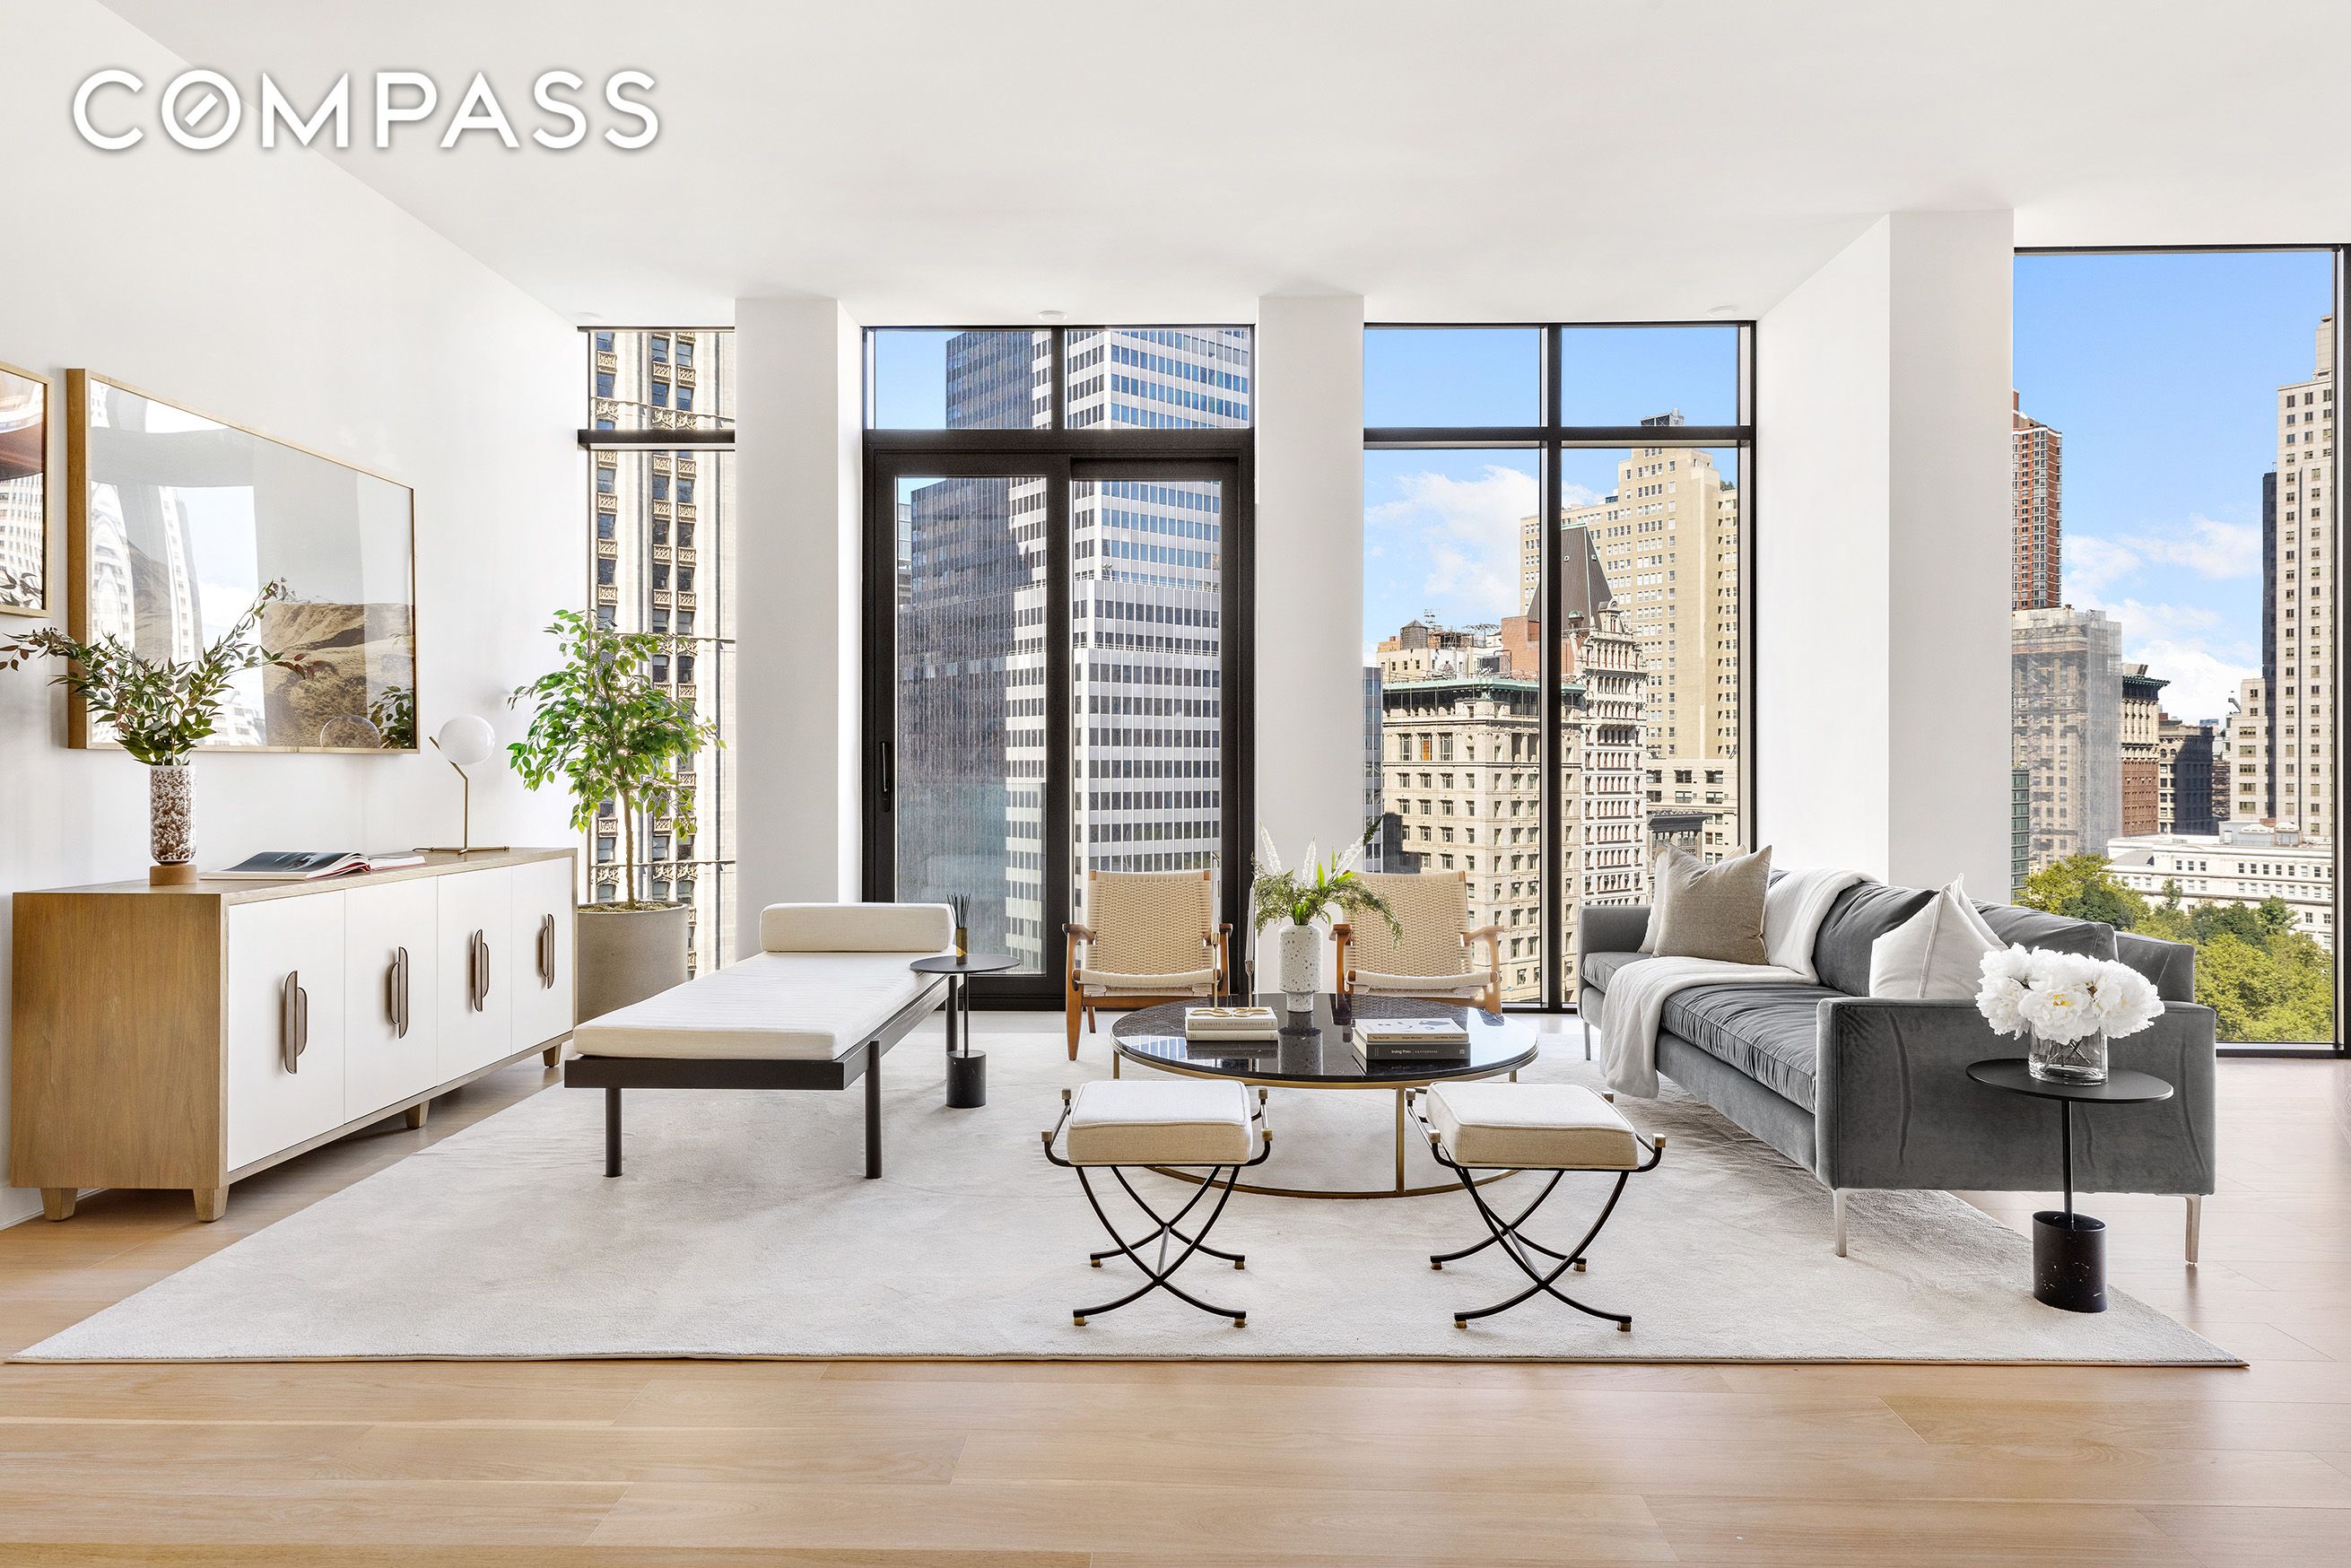 33 Park Row 11A, Financial District, Downtown, NYC - 3 Bedrooms  
3.5 Bathrooms  
8 Rooms - 